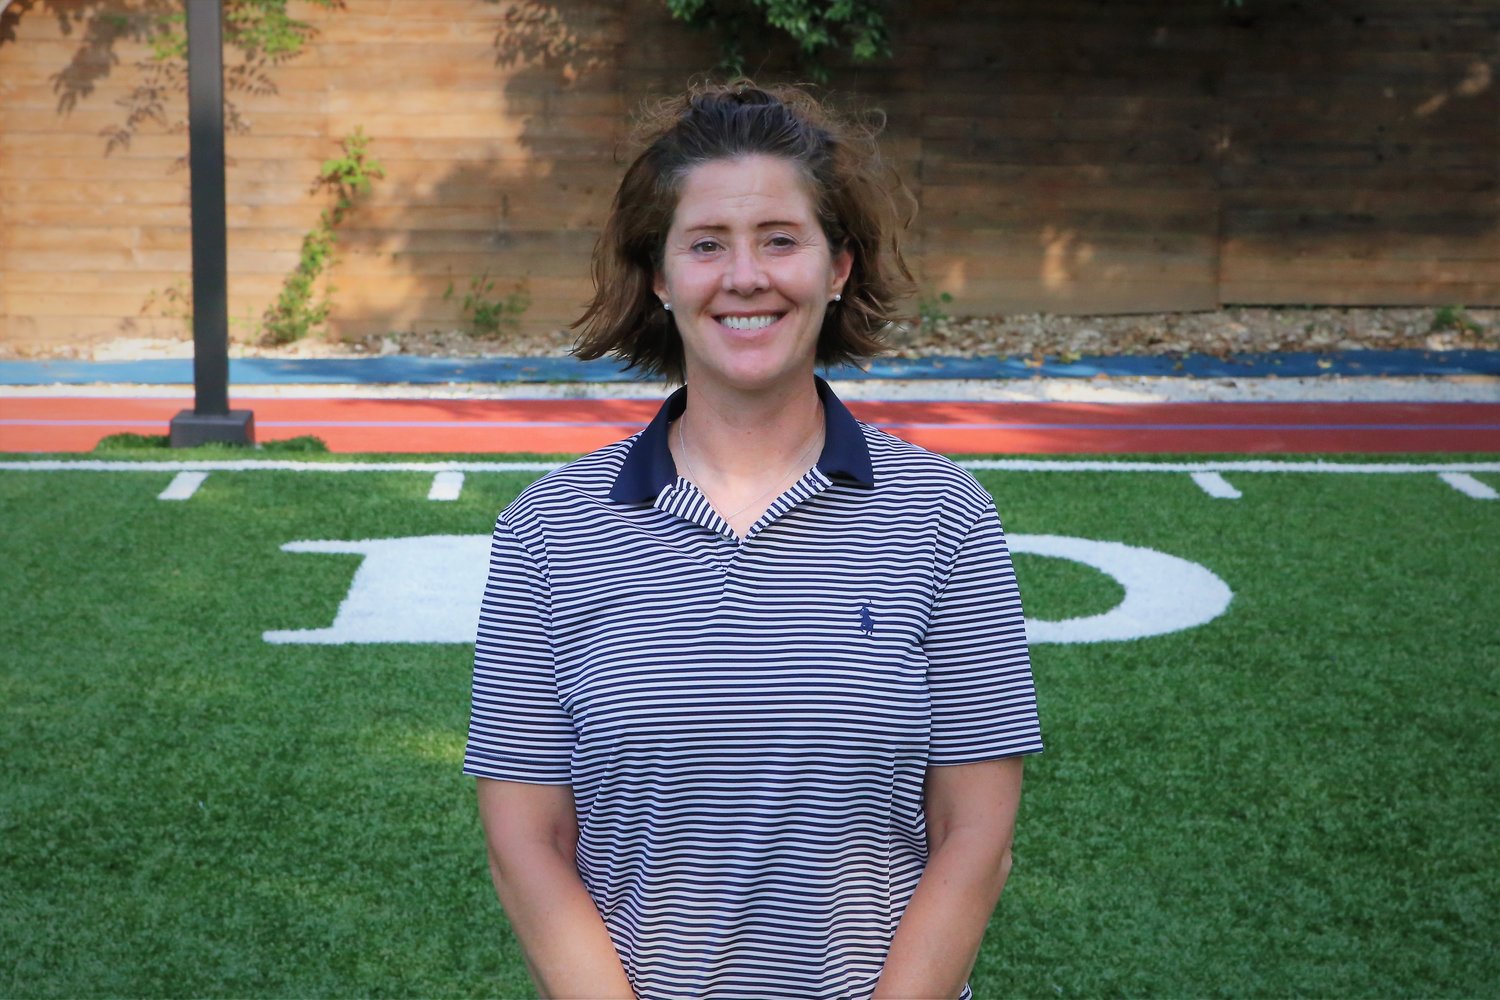 After spending a year as the executive director and head coach of G10 Academy FC, Rennie Rebe will find herself back on a high school campus this fall. She is the girls head soccer coach at Jordan High, Katy ISD’s ninth high school that opens in August.